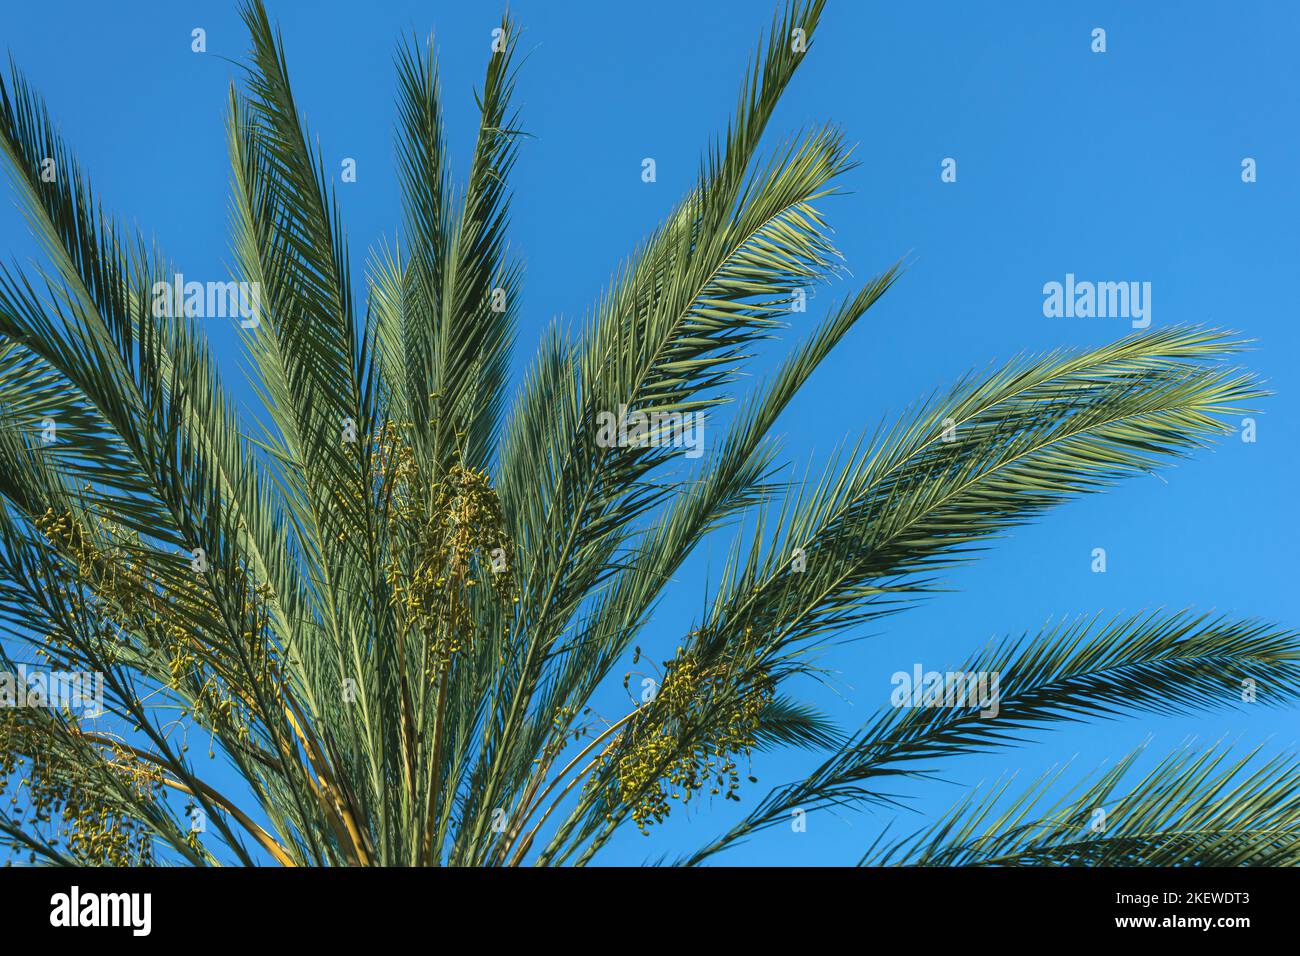 Green palm tree branches with a plain blue background Stock Photo